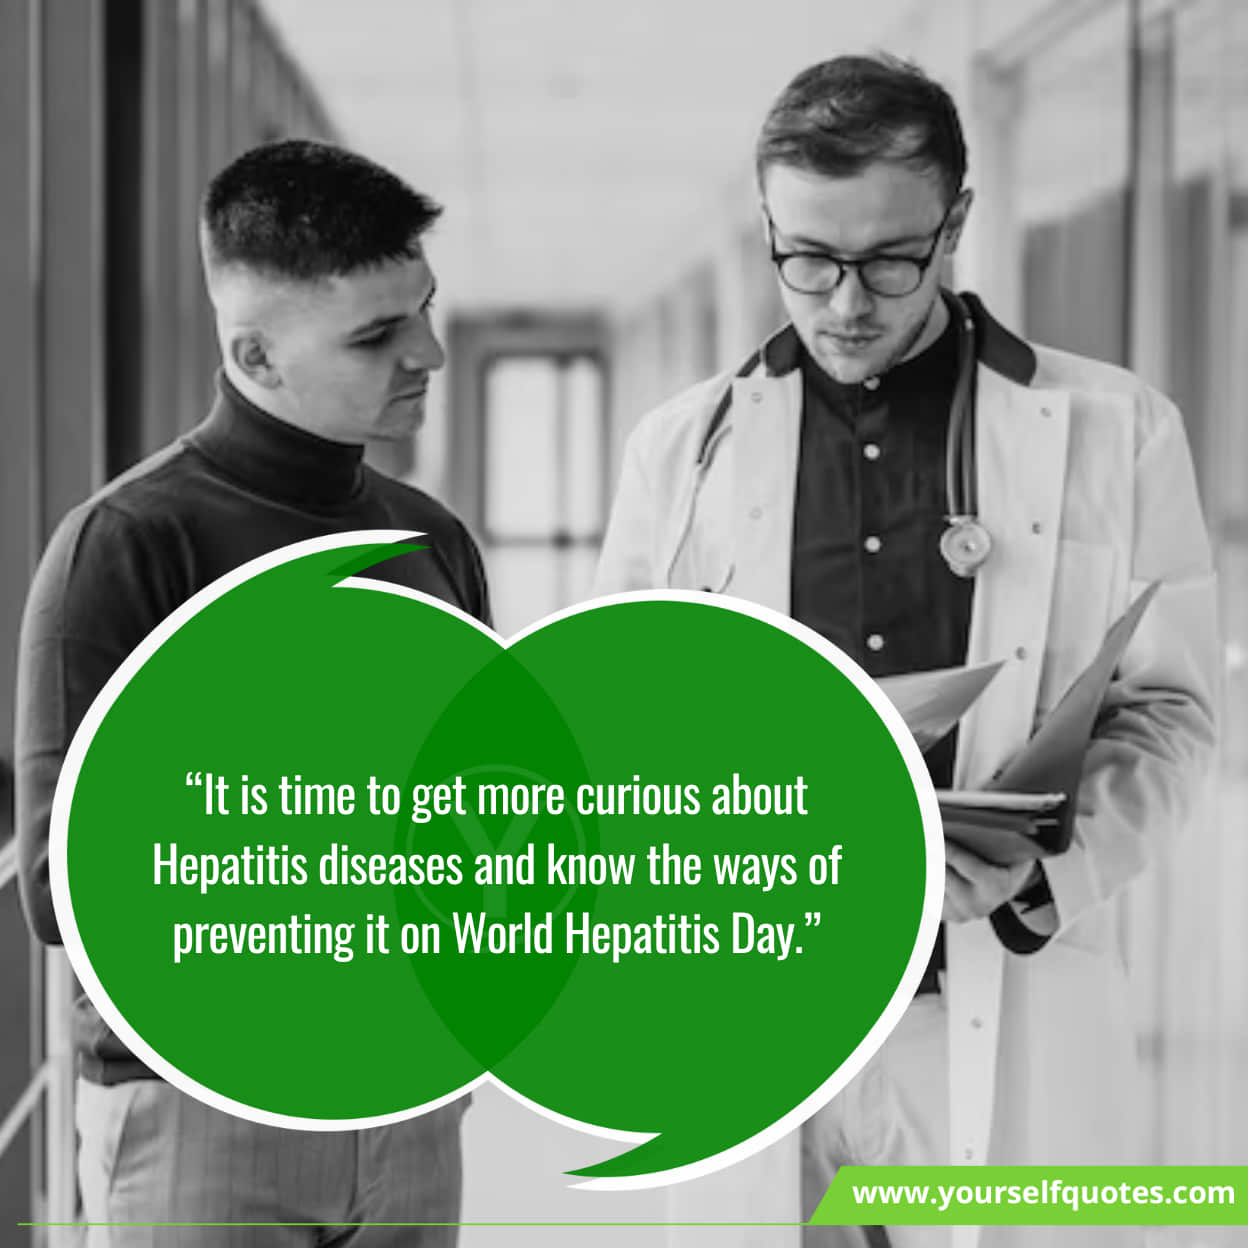 Quotes on fighting Hepatitis and spreading awareness